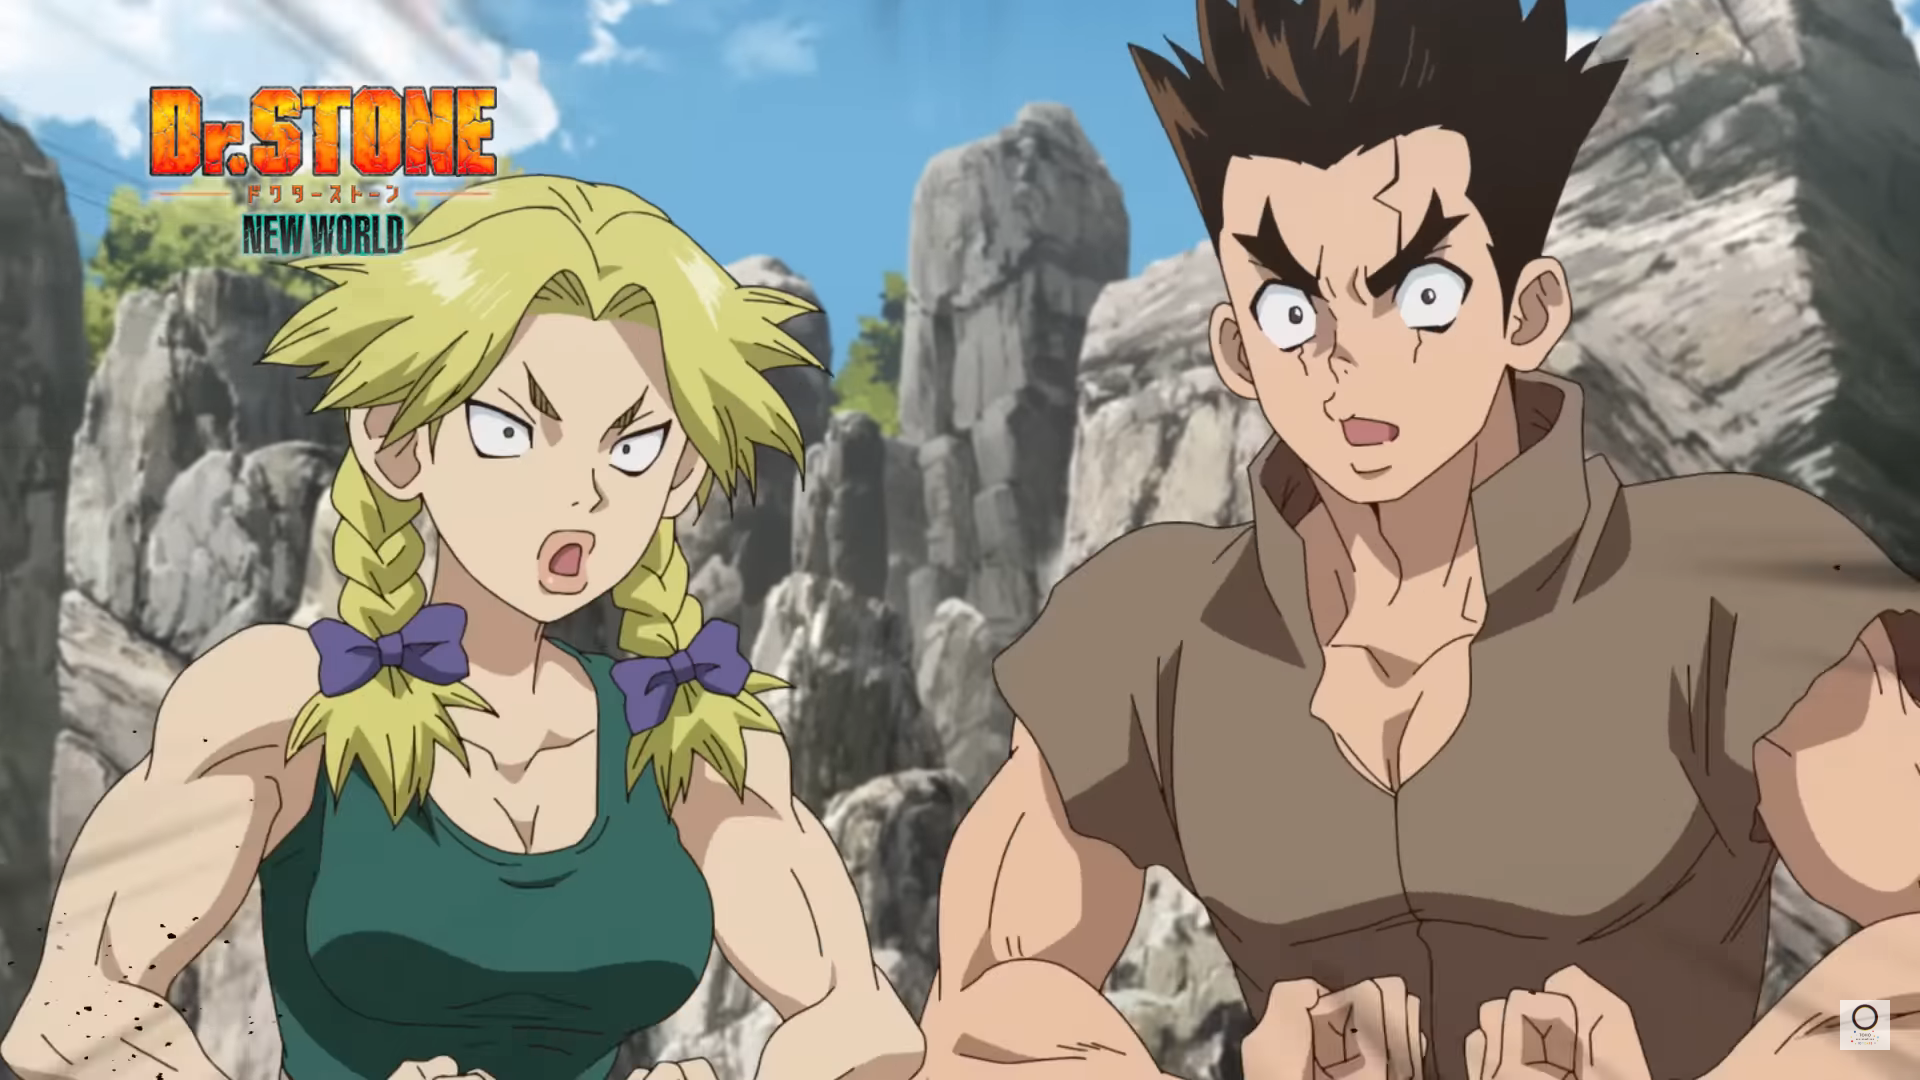 Dr. Stone: New World Episode 4 Review - Crow's World of Anime in 2023